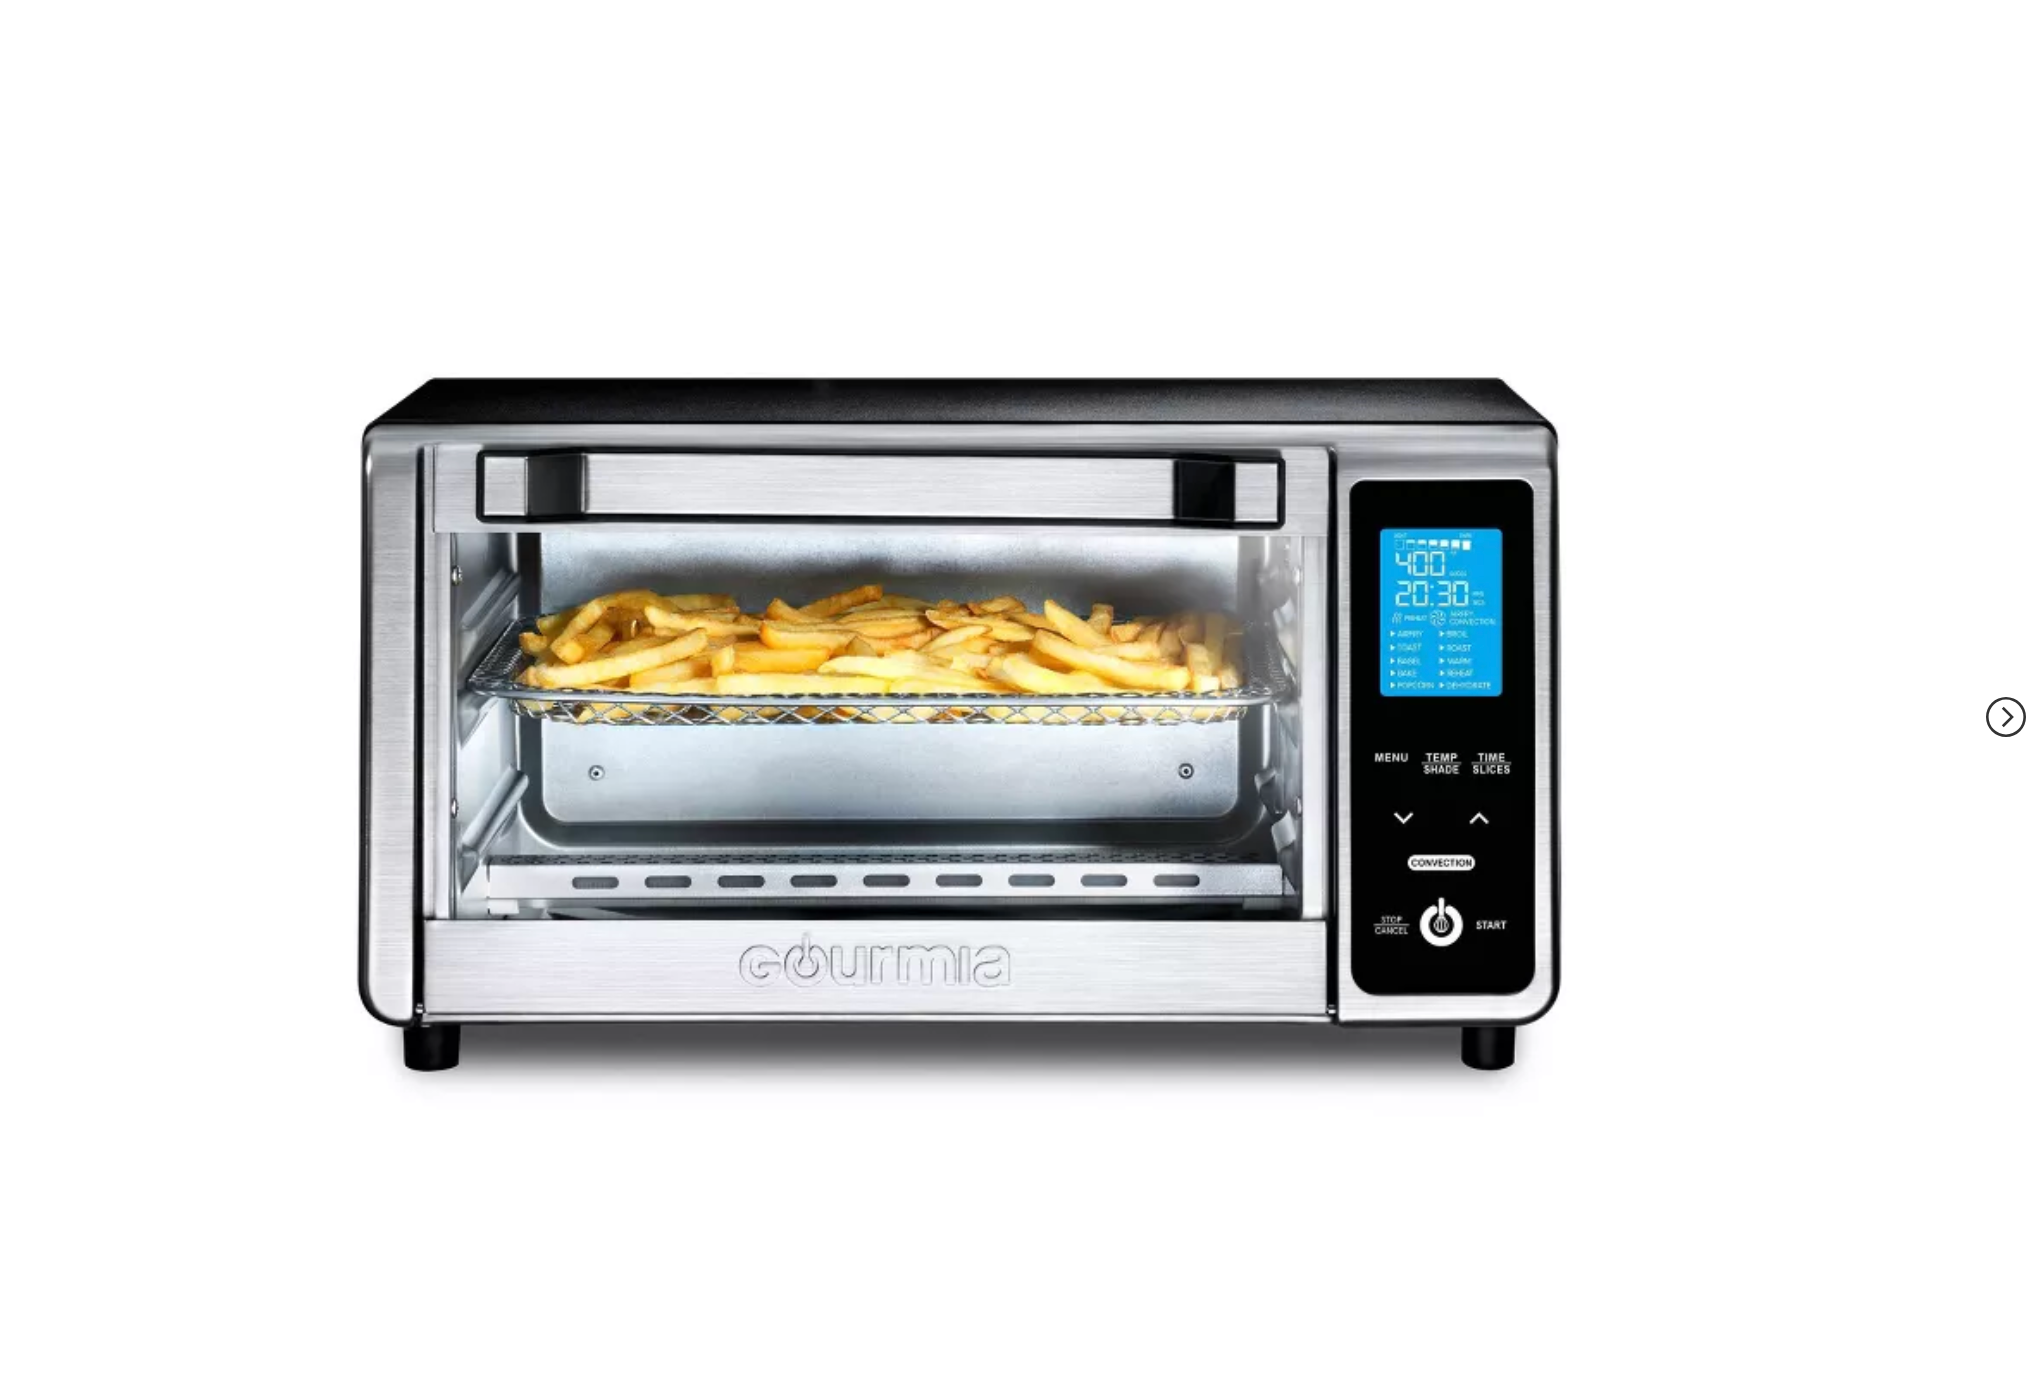 Score 43% off this Cuisinart air fryer/toaster oven combo for a limited  time